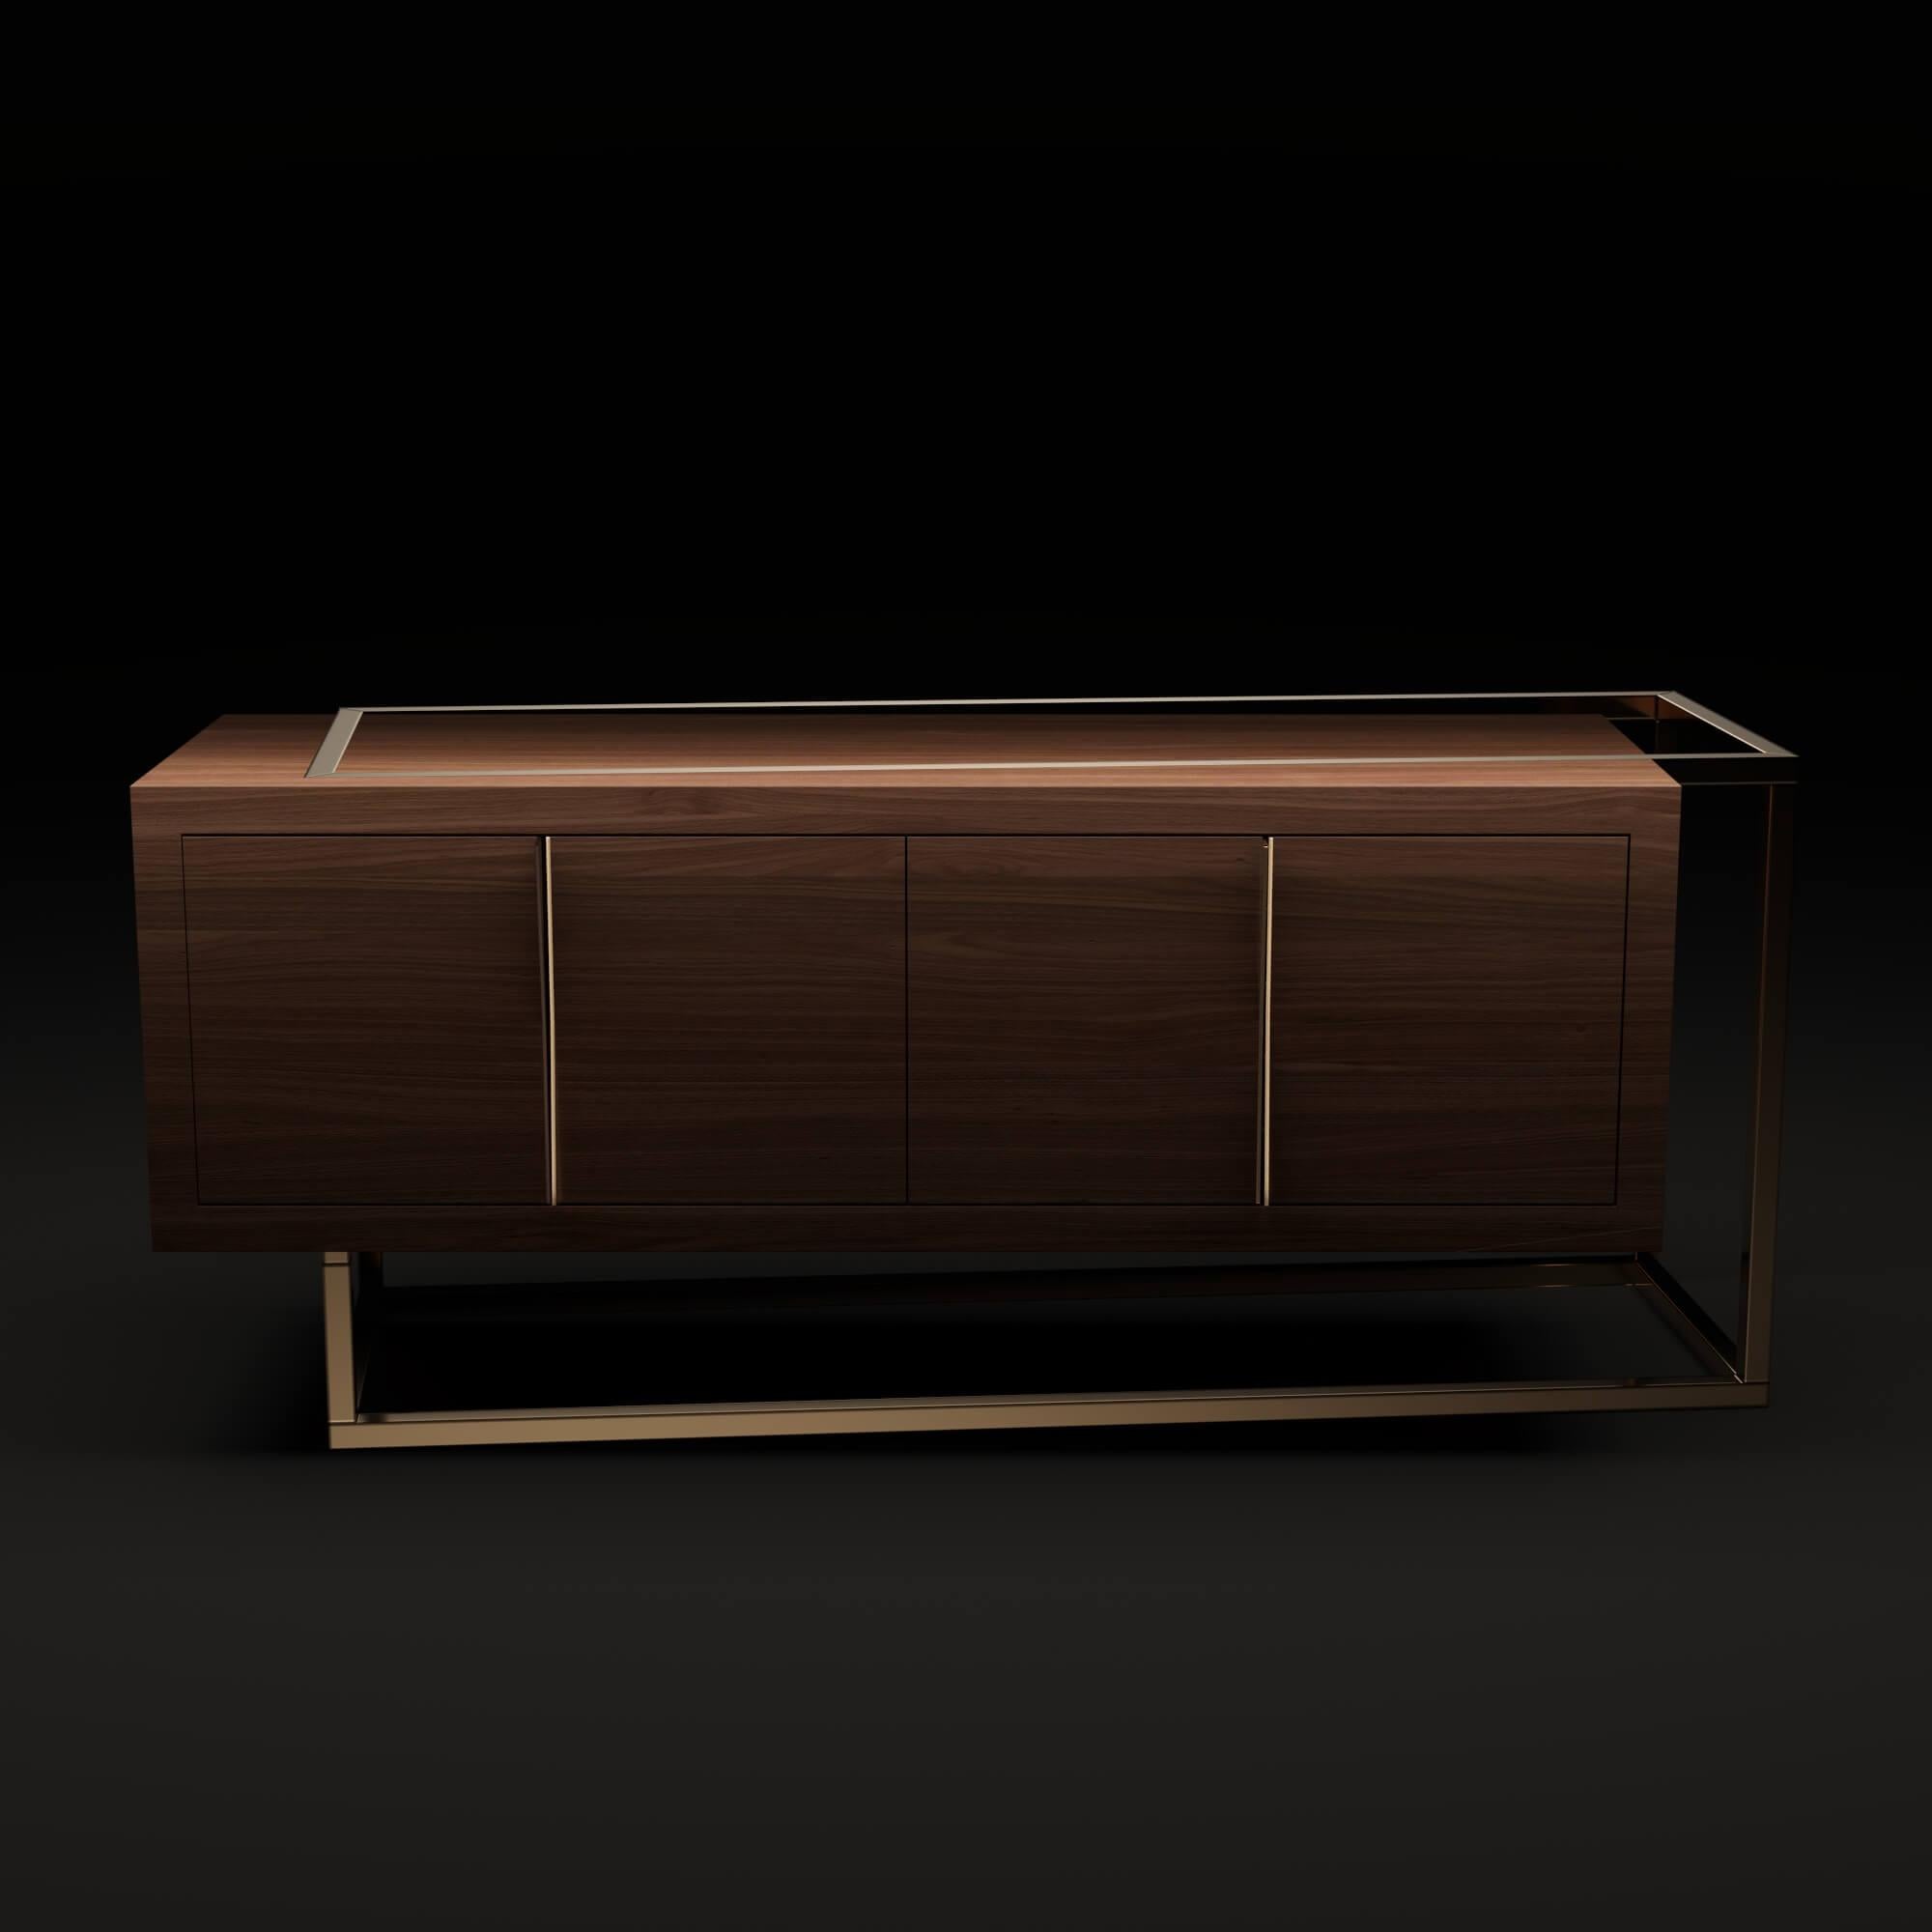 Stainless Steel Modern Minimalist Credenza Sideboard in Walnut Wood and Brushed Brass For Sale